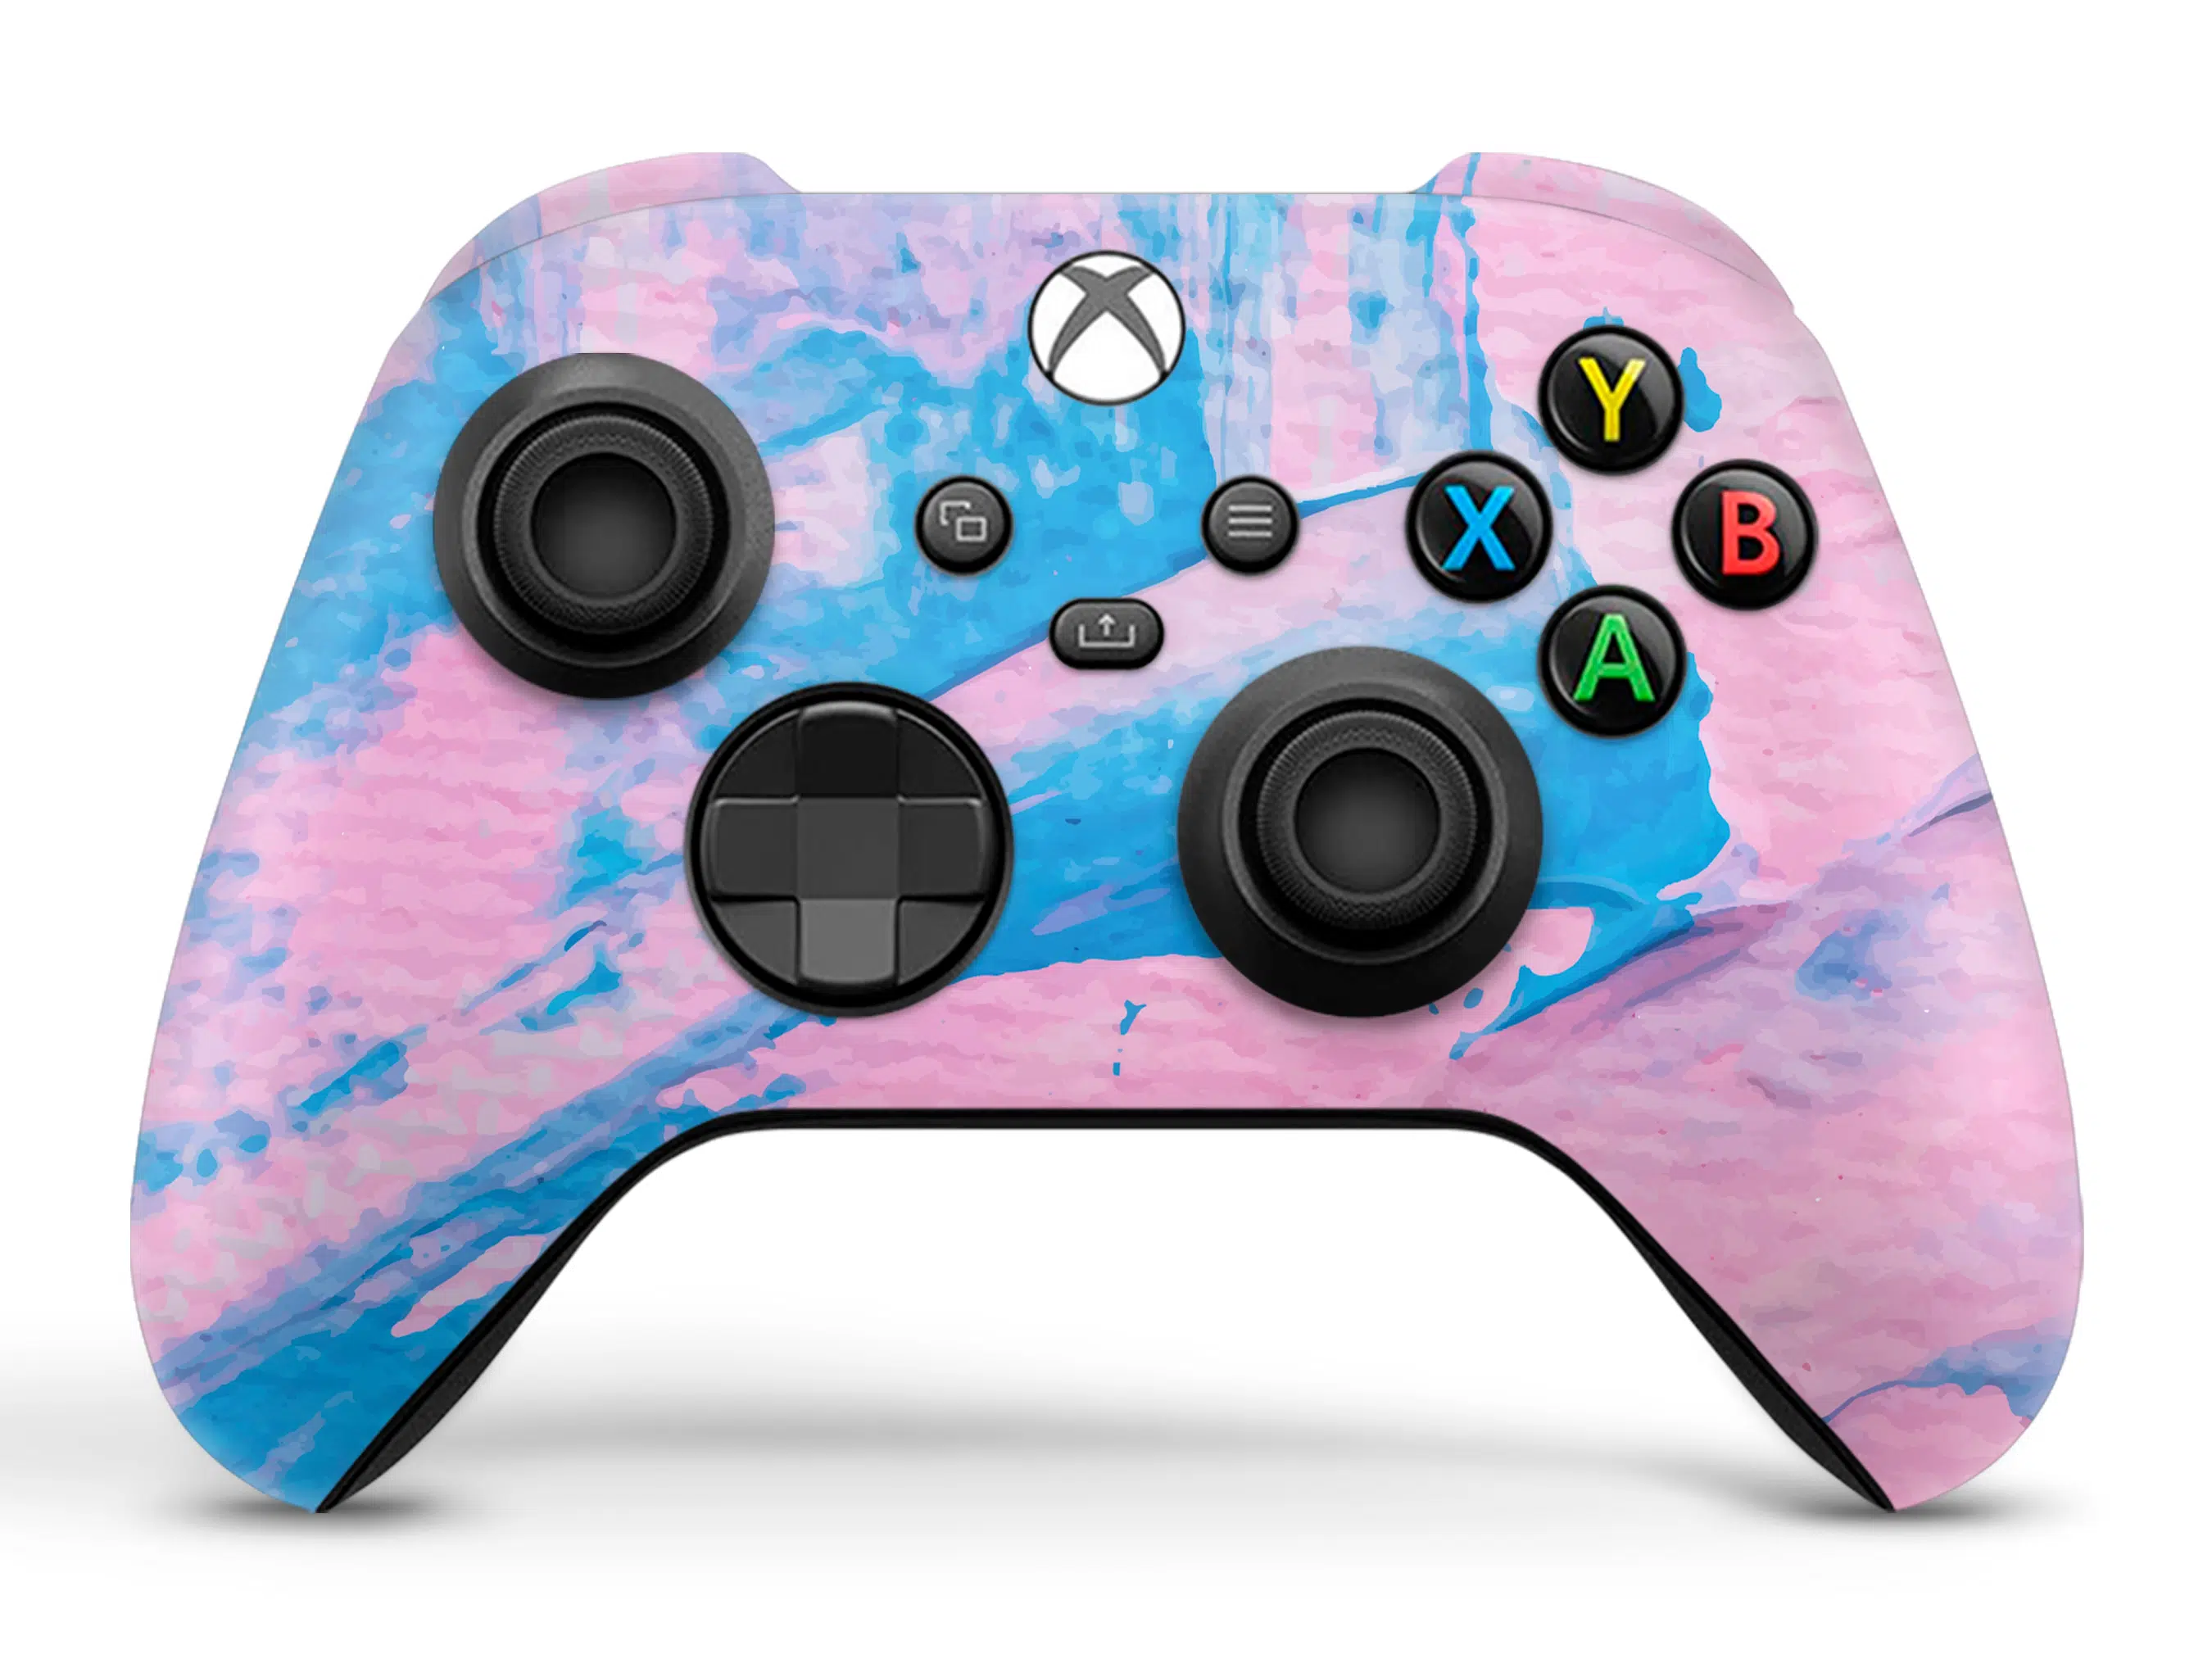 ABSTRACT PAINT XBOX SERIES X SKIN